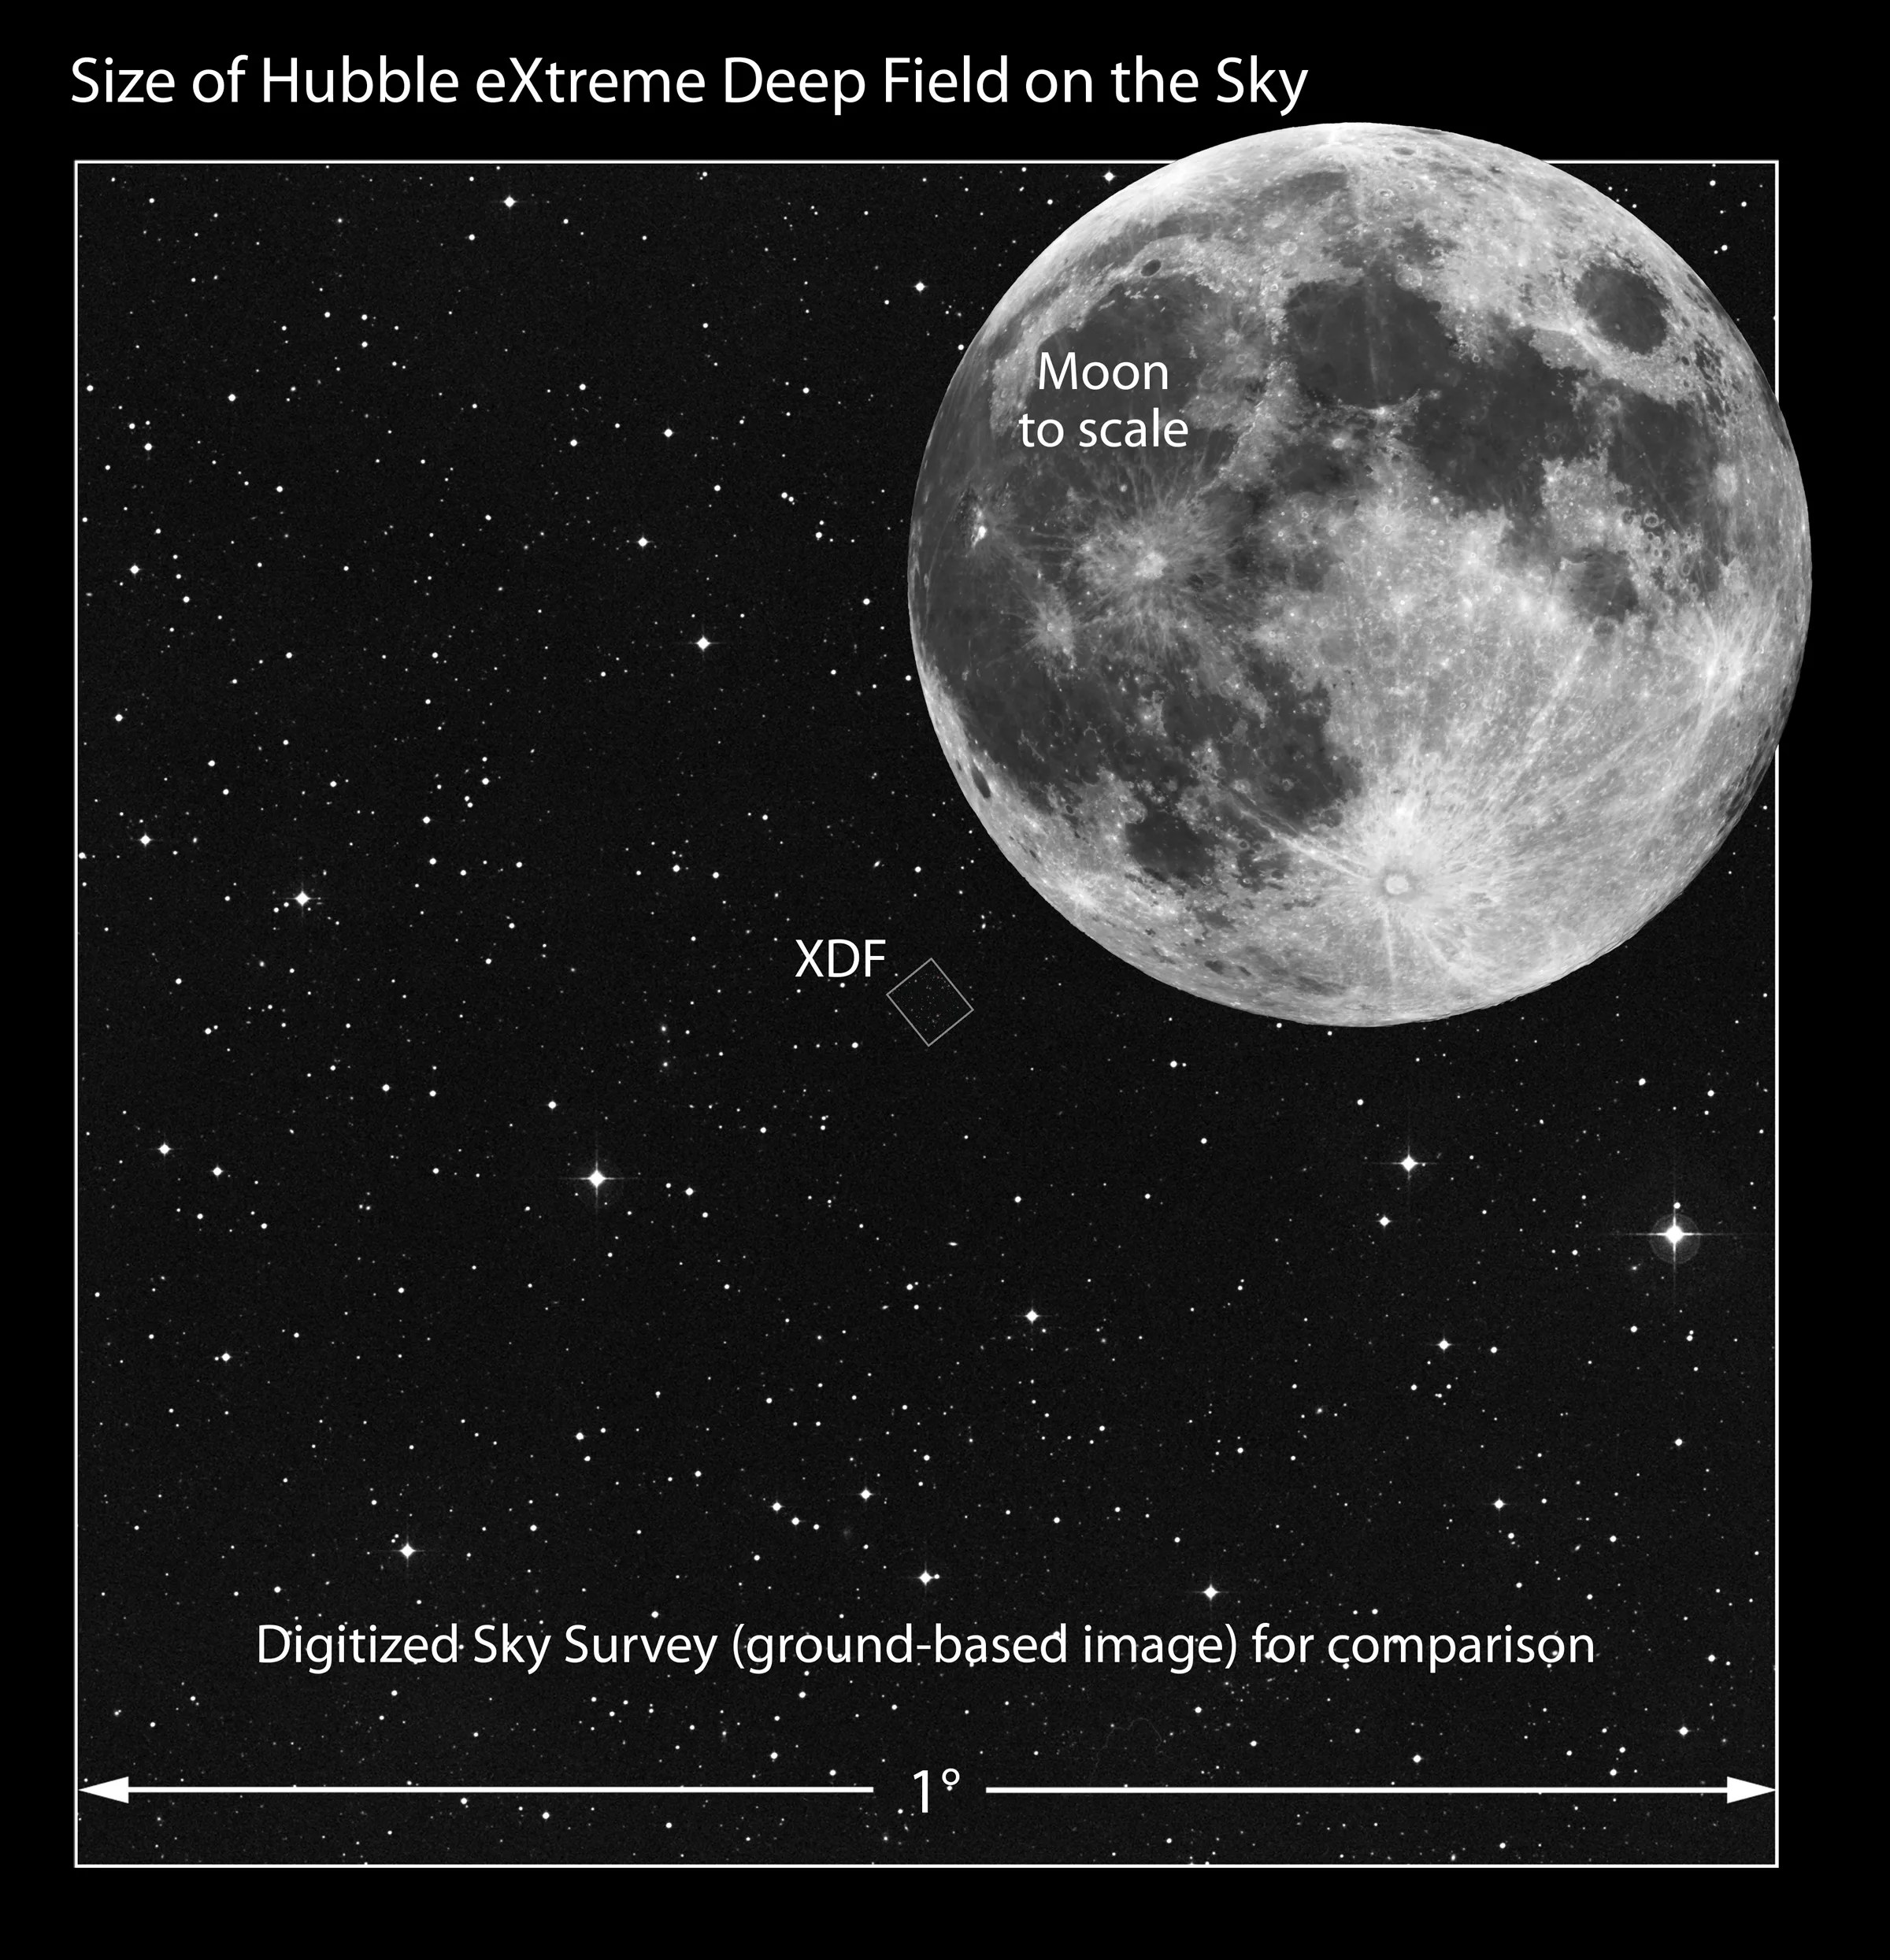 image showing relative size of the moon compared to portion of the sky shown in Hubble XDF image